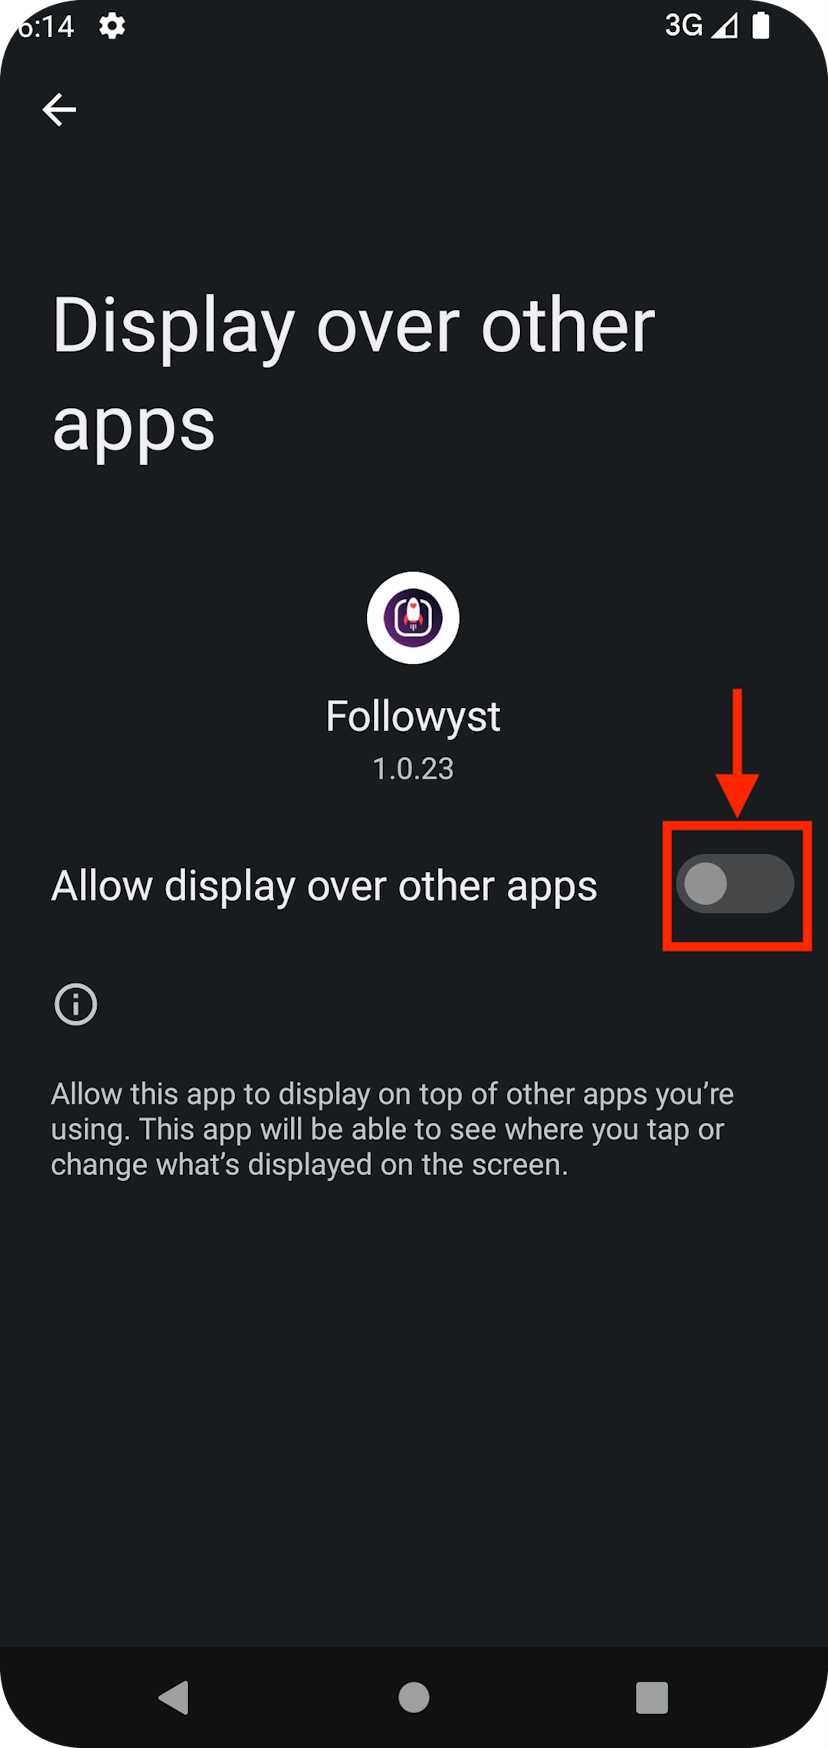 Screenshot of Android's "Display over other apps" permission screen